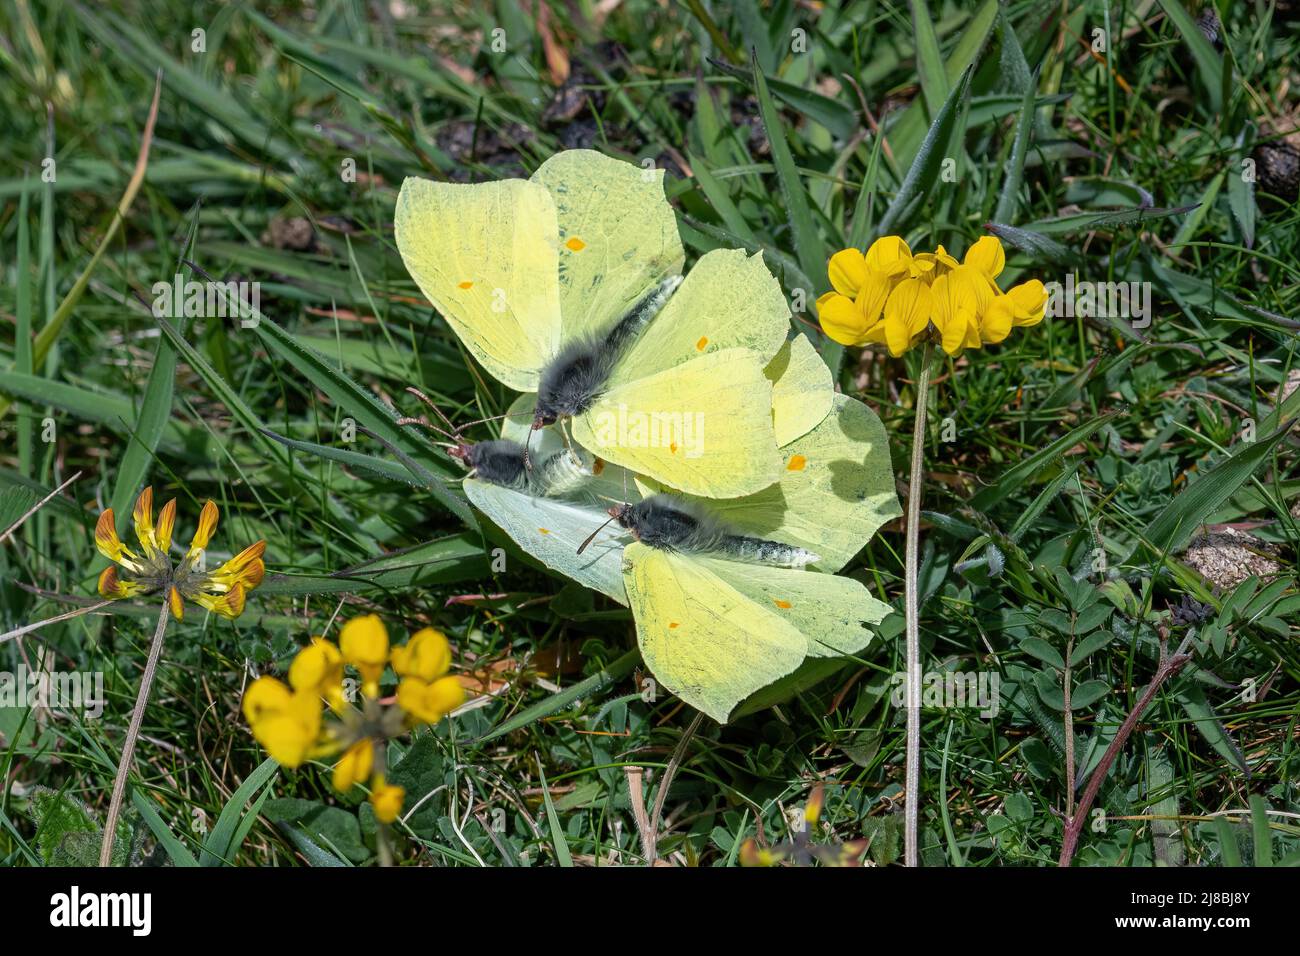 Brimstone butterfly Gonepteryx rhamni courtship behaviour. Female butterfly rejecting two male butterflies, England, UK Stock Photo